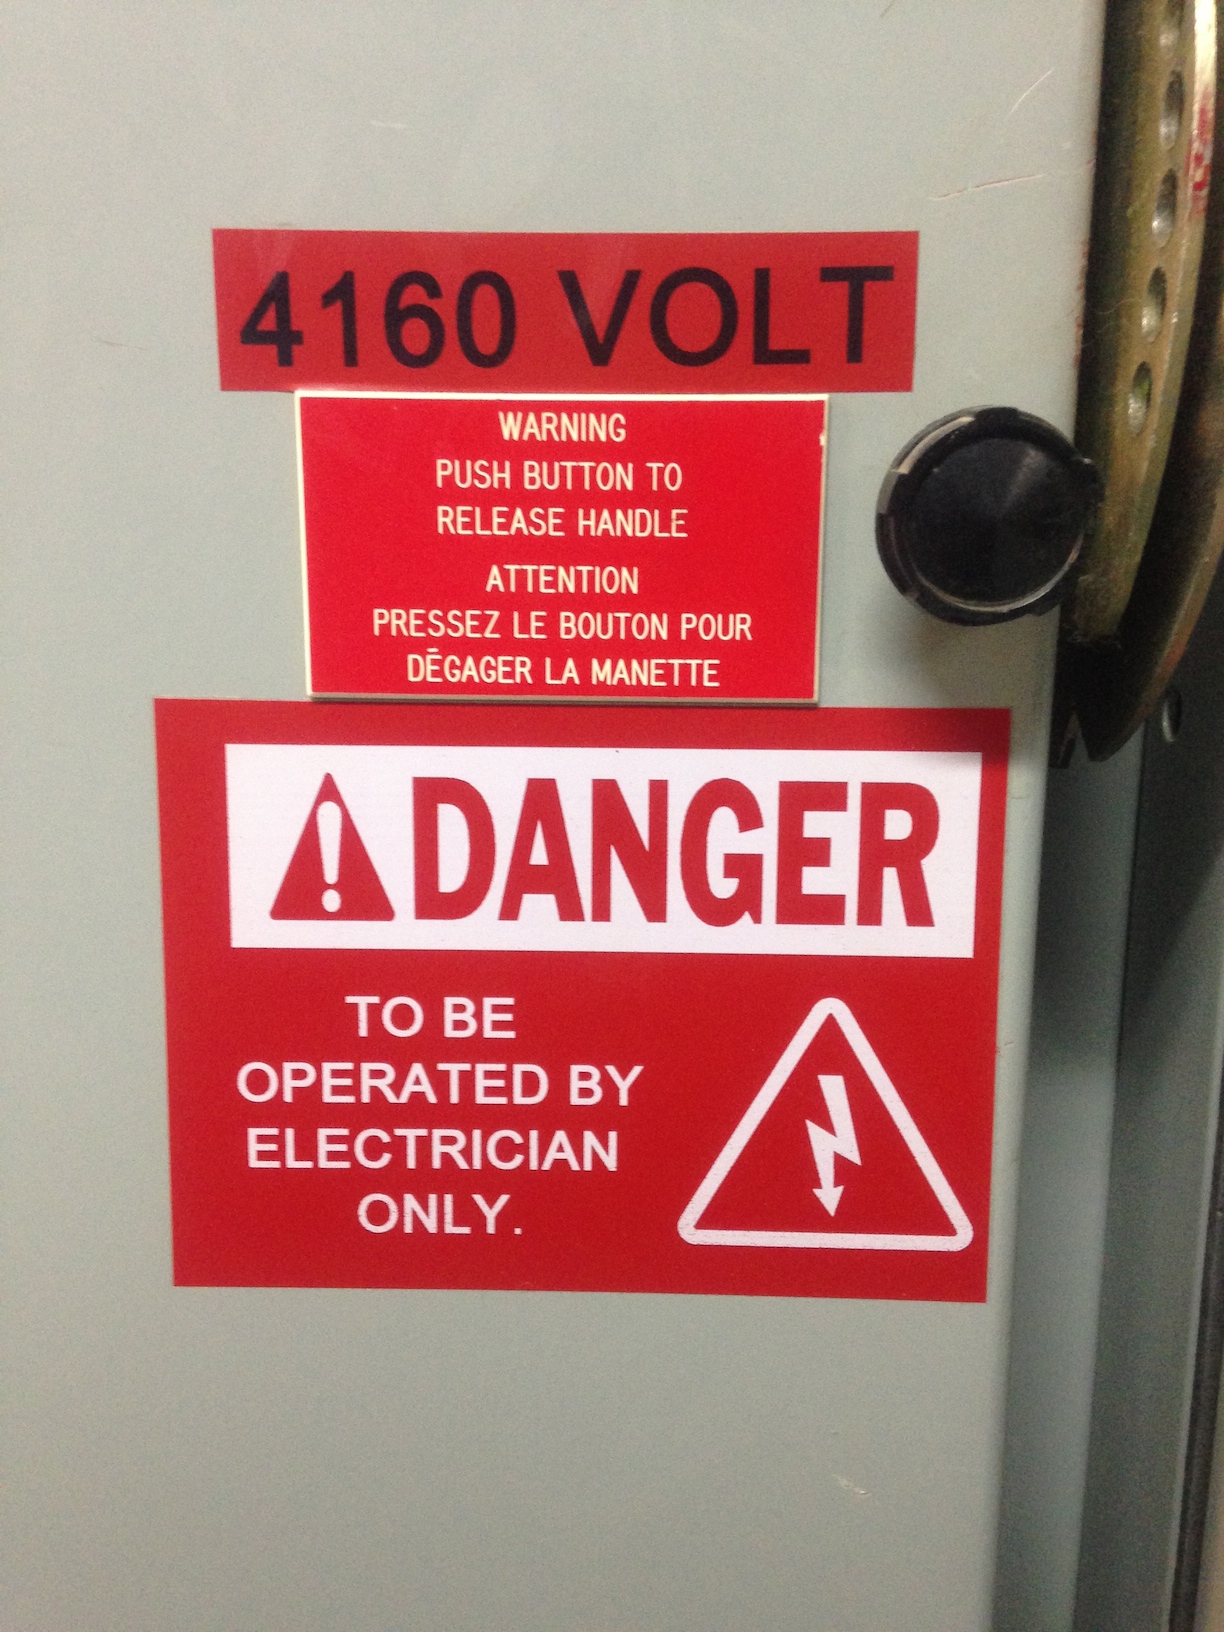 Electrical safety signs